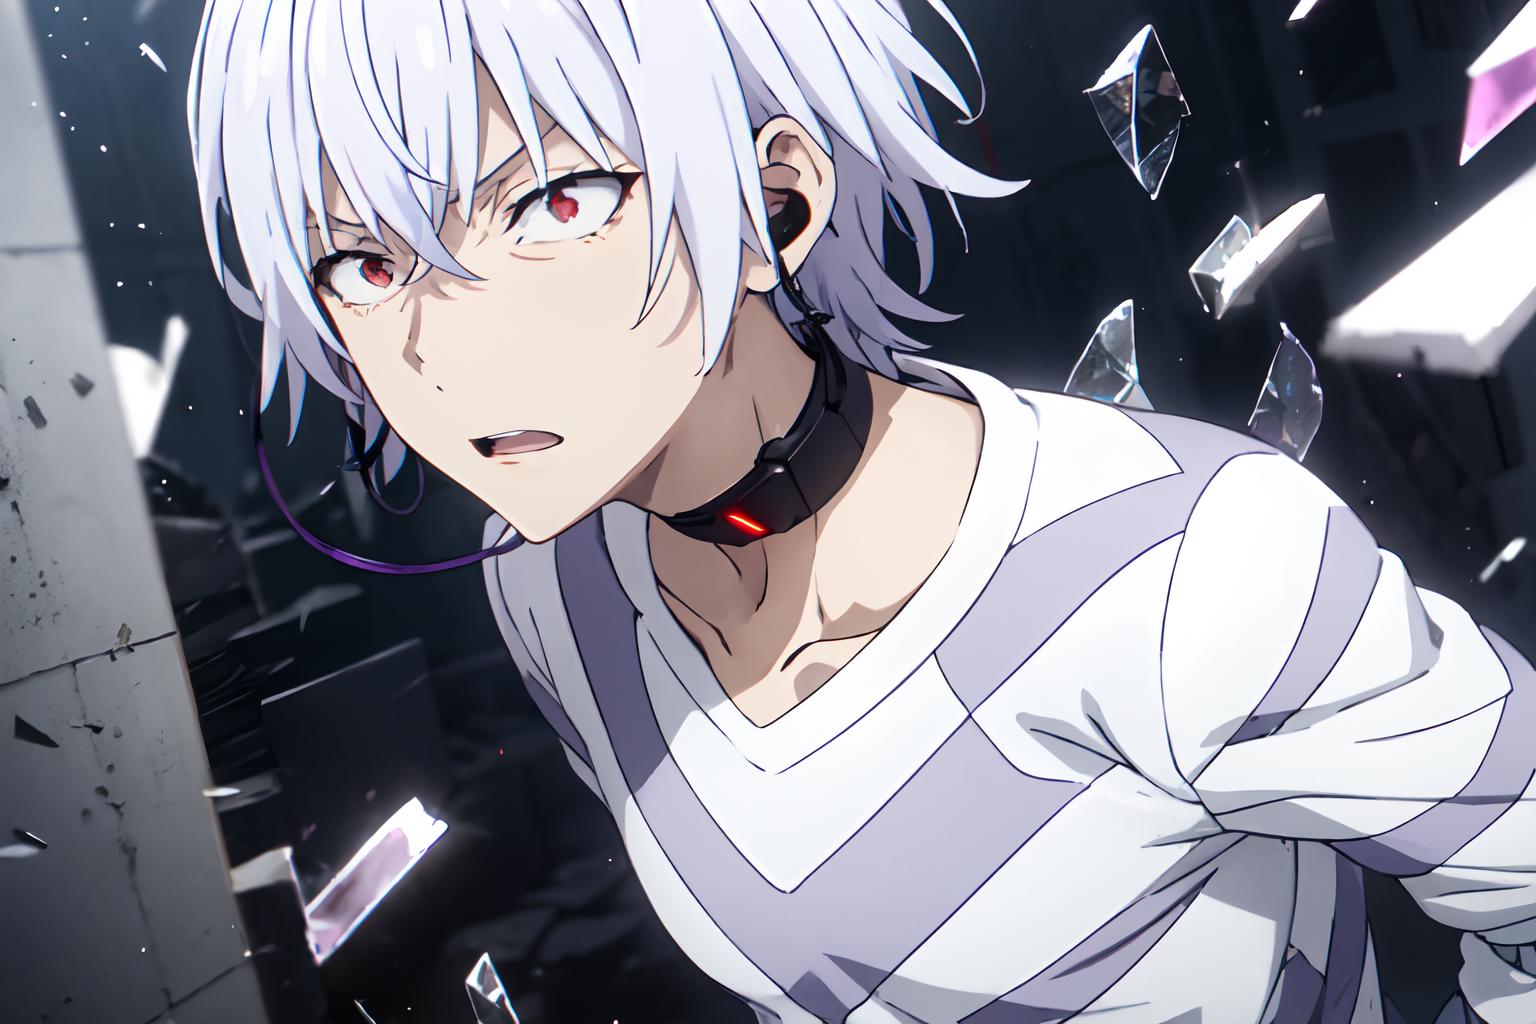 A Certain Scientific Accelerator Manga Gets TV Anime in 2019 - News - Anime  News Network